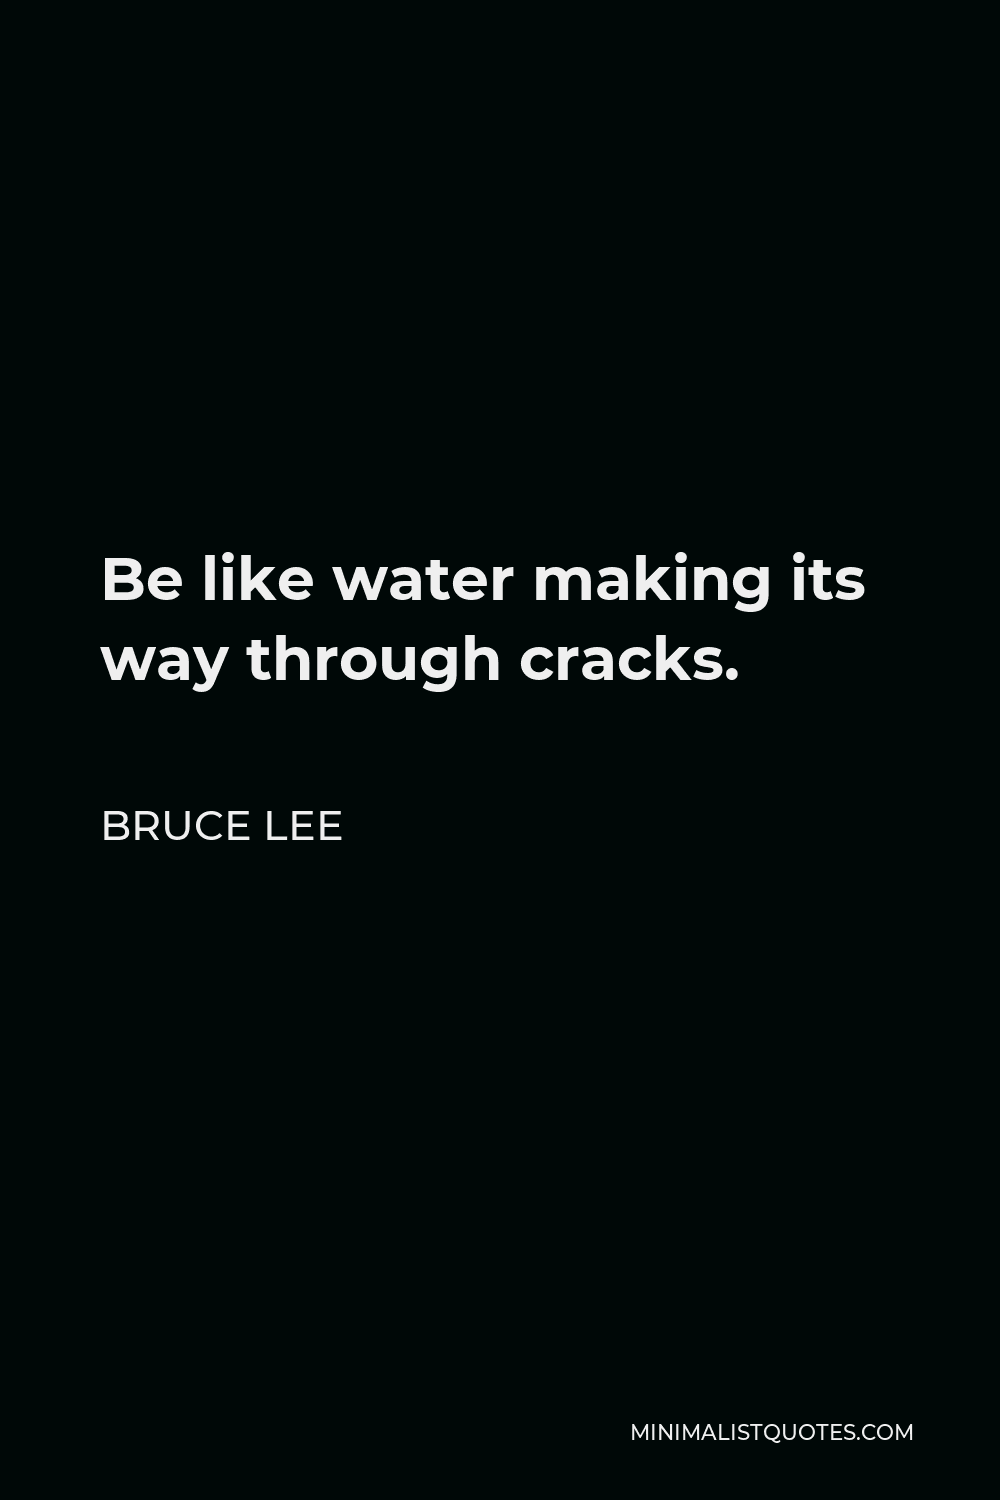 Bruce Lee Quote: Be like water making its way through cracks.